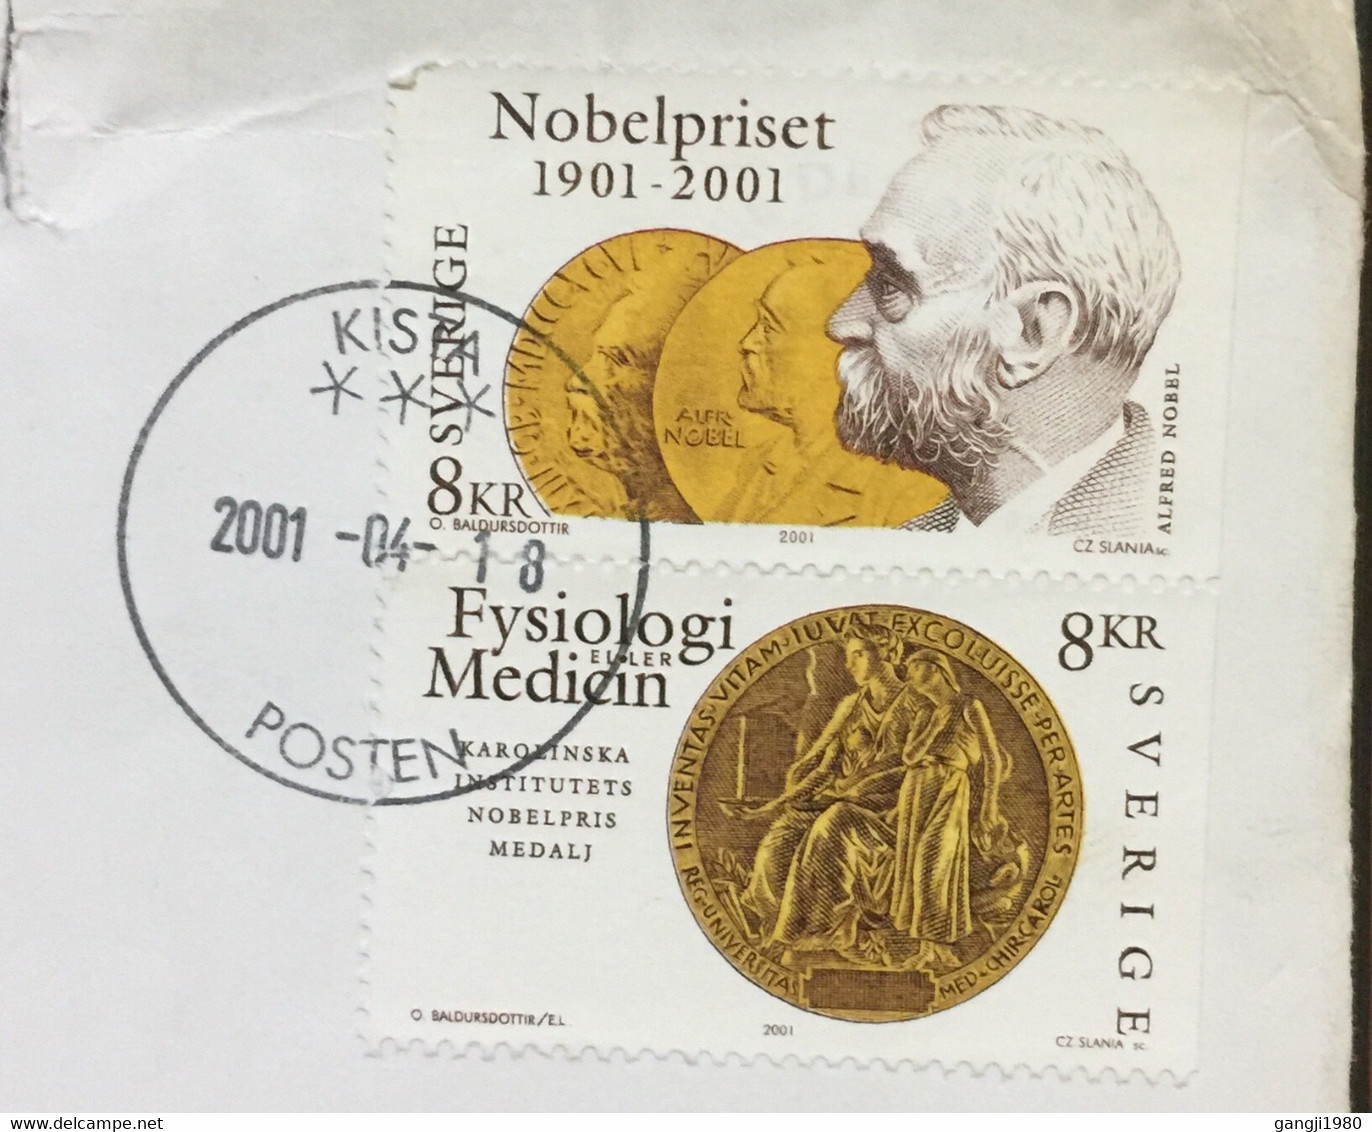 SWEDEN 2001, COVER USED TO INDIA, NOBEL PRIZE & MEDAL, SE TENANT STAMP, KISTA CITY CANCEL,16 KROWN RATE - Lettres & Documents